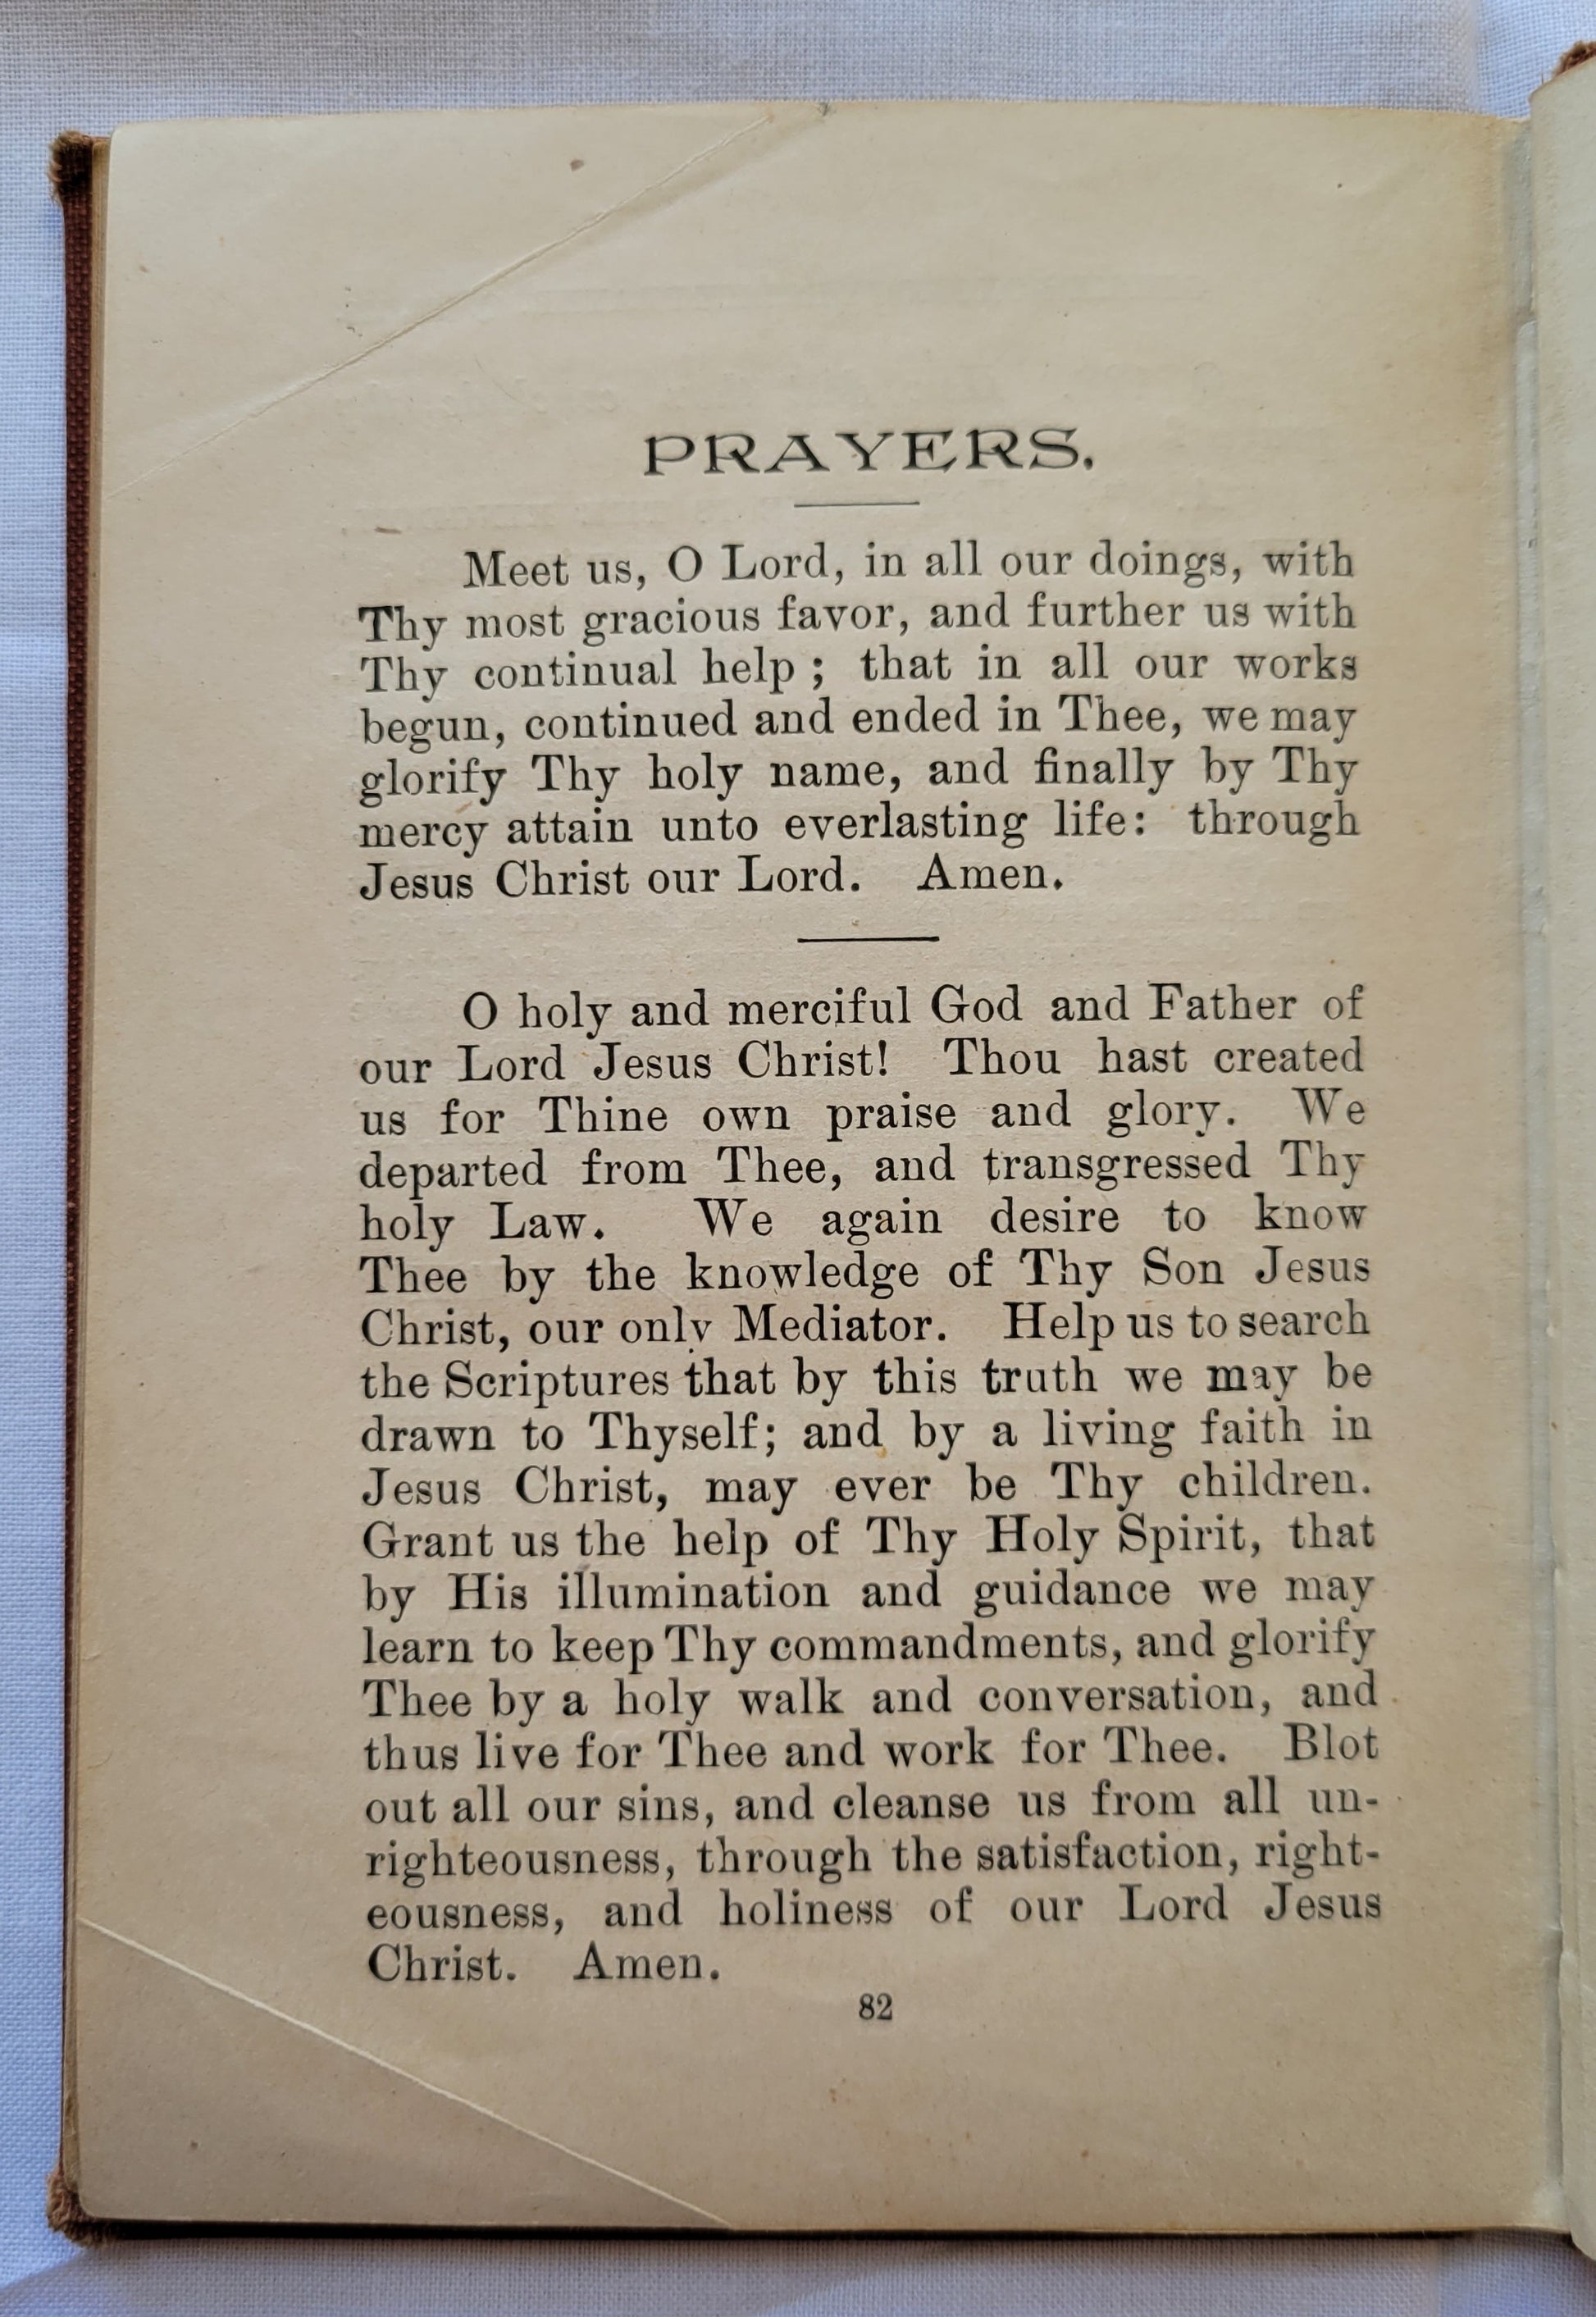 Antique book for sale "The Heidelberg Catechism: With Questions for the Catechetical Class and the Sunday-School by Rec. Aaron Spangler, A.M.", published in 1899 by the Central Publishing House. Page 82